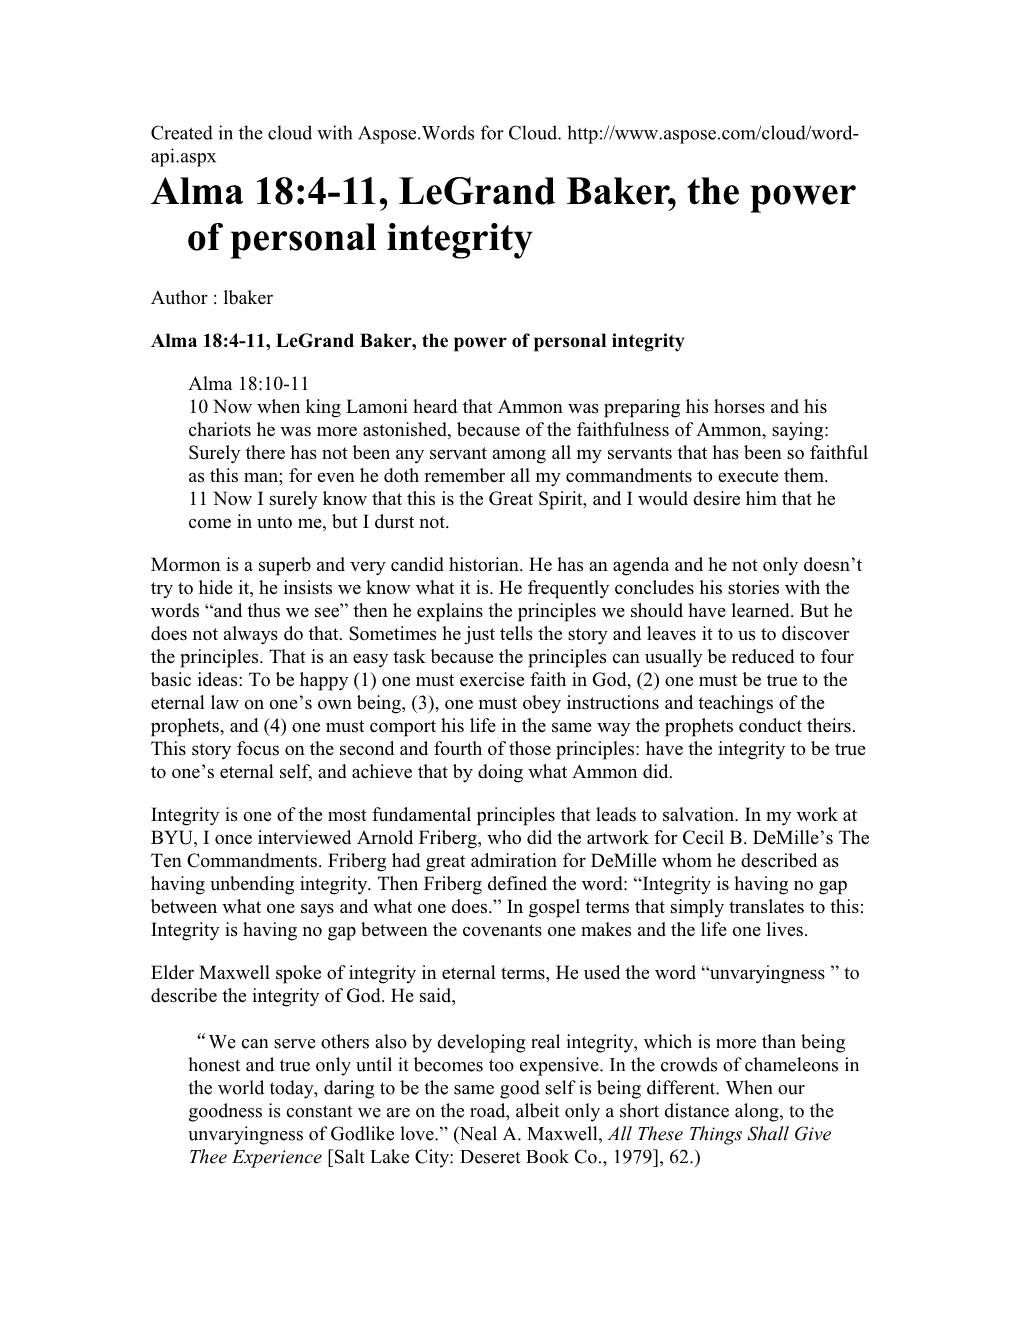 Alma 18:4-11, Legrand Baker, the Power of Personal Integrity